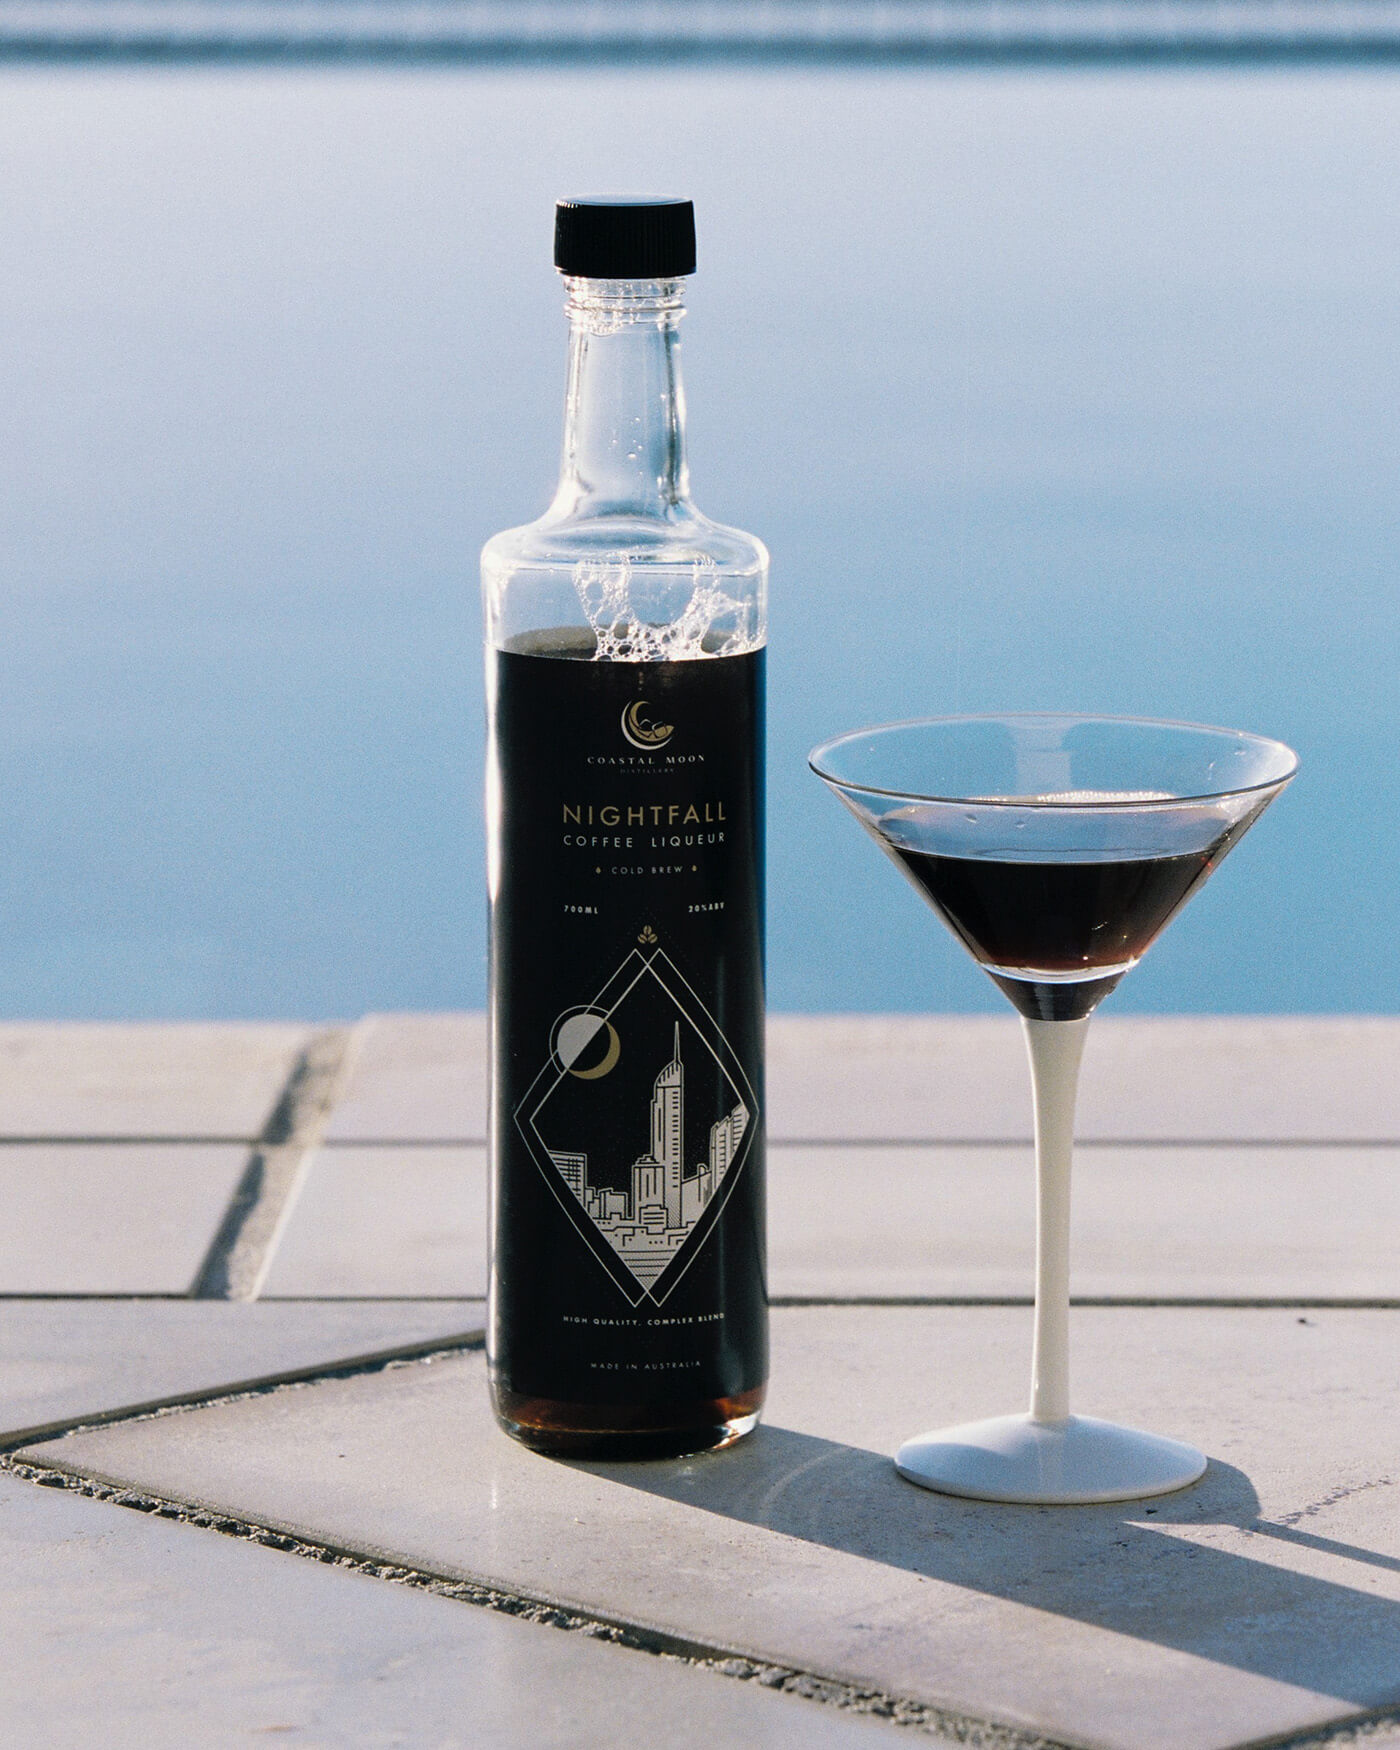 A Peek Into the Experience of Tasting Coffee Liqueur